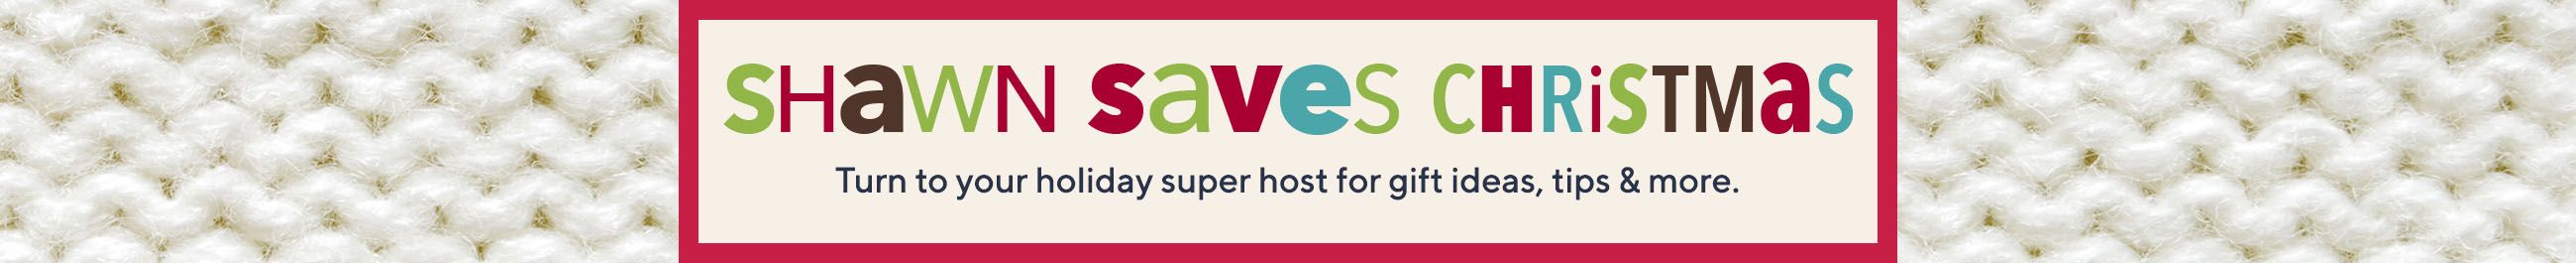 Shawn Saves Christmas  Turn to your holiday super host for gift ideas, tips & more. 